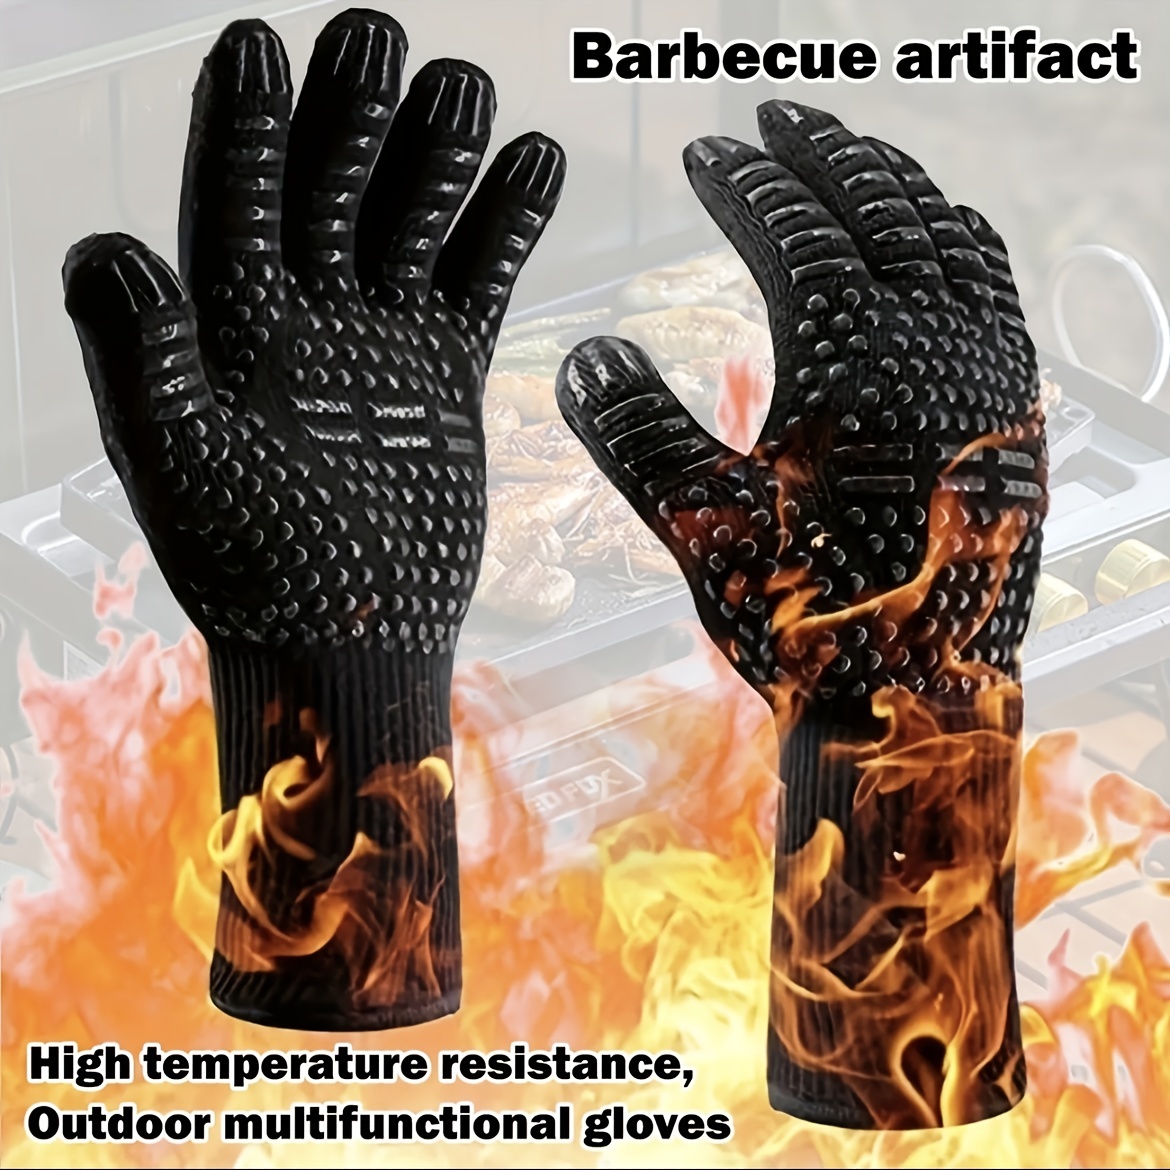 

2pcs, Oven Mitts, Creative Black Oven Mitts, Heat Insulation Potholders, Non-slip Gloves For Cooking Barbecue, Prevent 800 Degree Bright Fire, Washable Kitchen Mitt, Kitchen Supplies, Bbq Accessaries